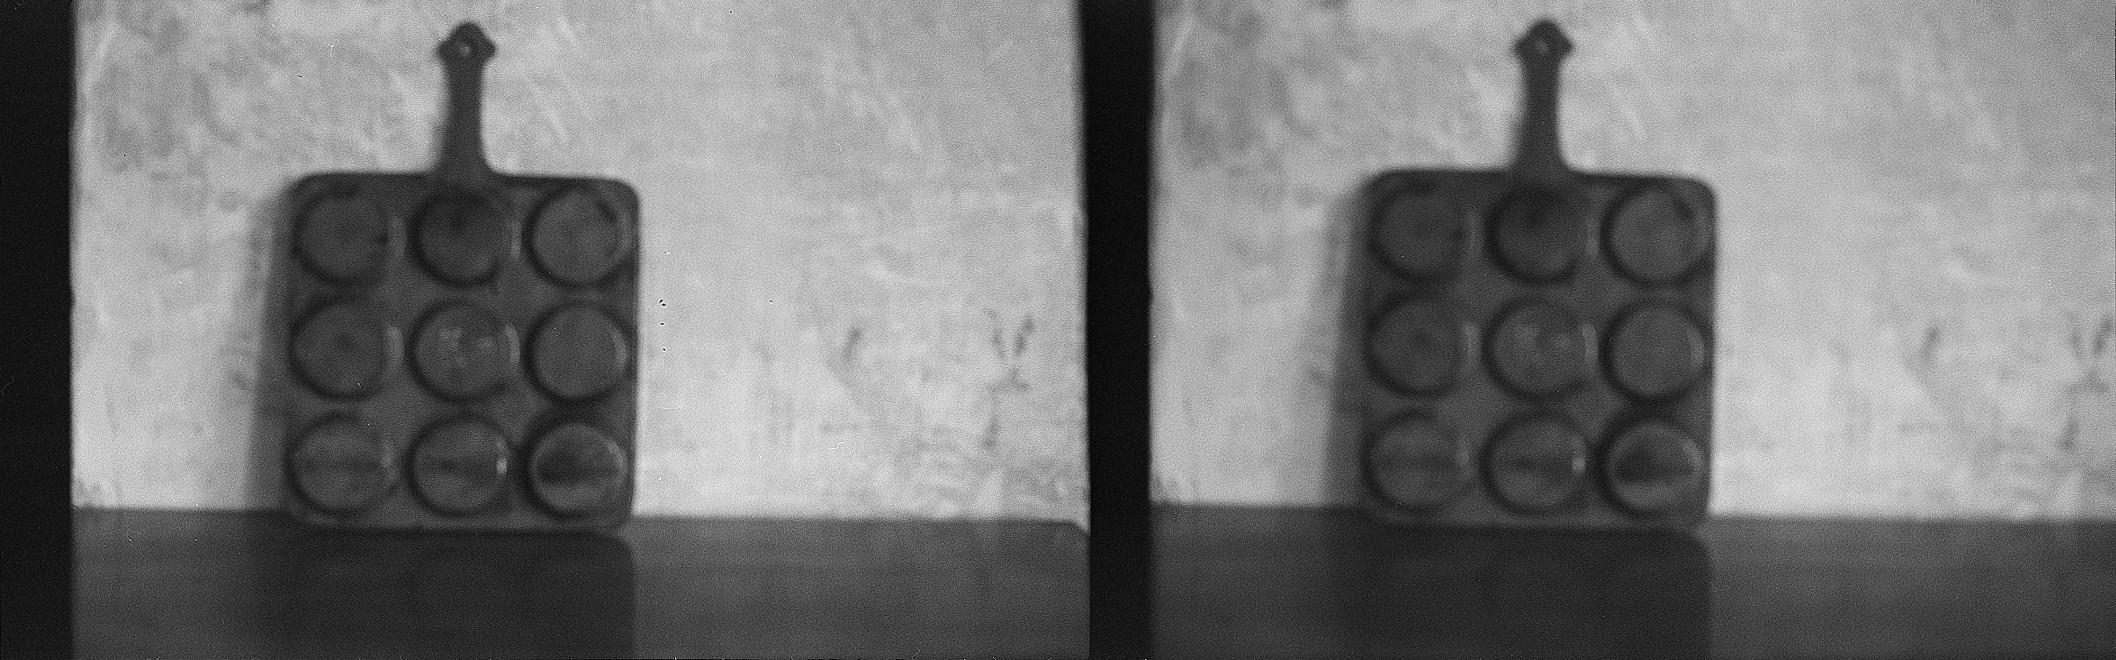 Kathrin Herold, Pilsen 1870 and Untitled 1 and Untitled (2020), b/w photography, Zeiss Ikon Tessar, medium format 6x9